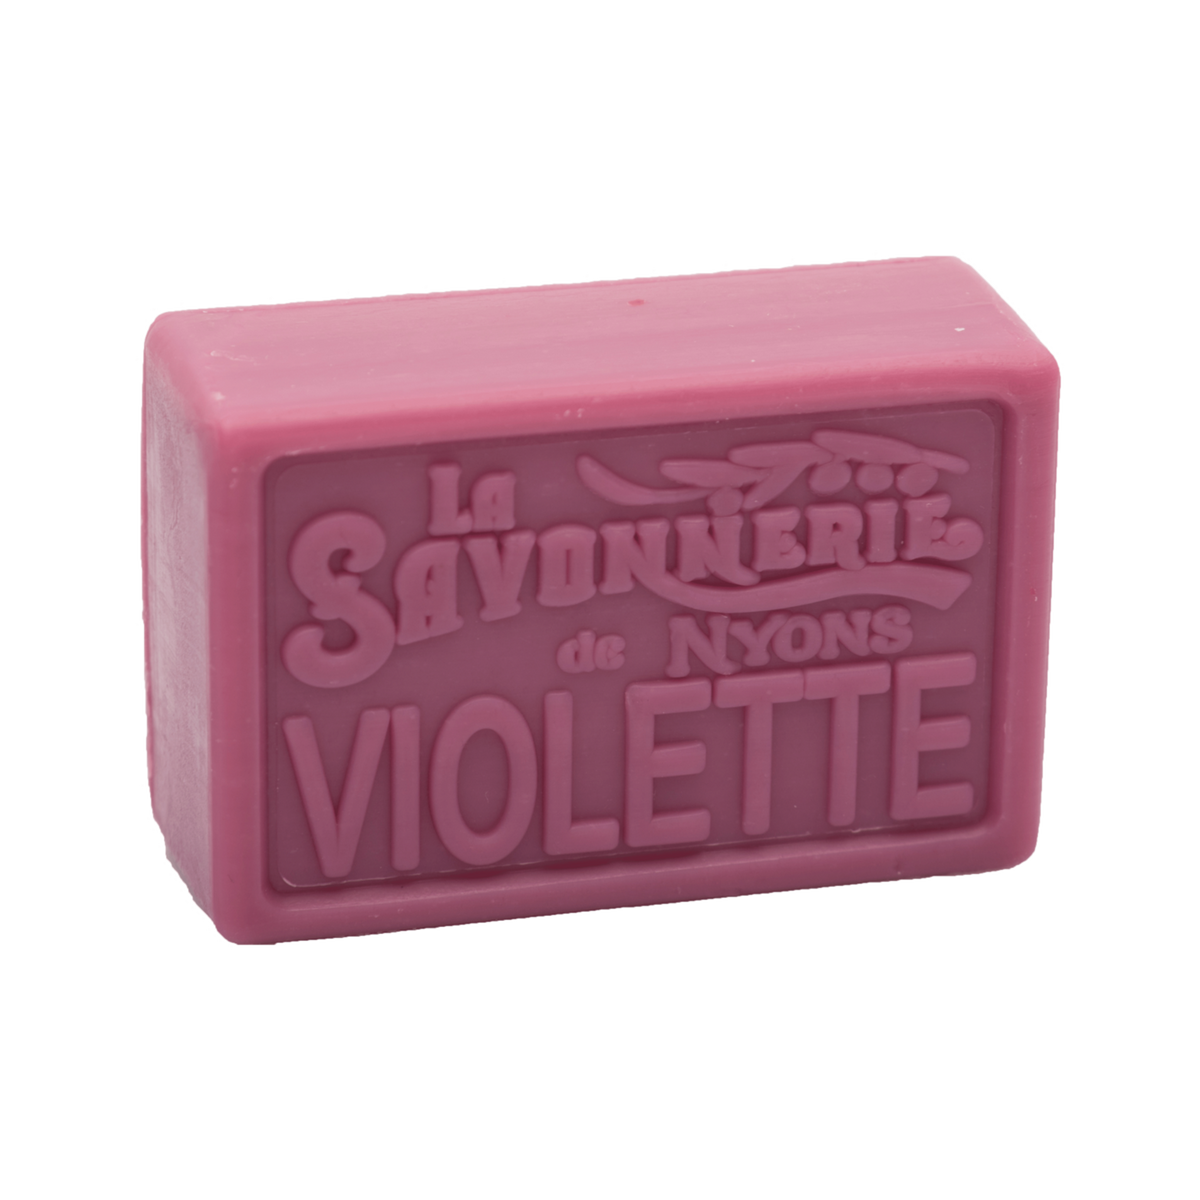 A bar of pink "La Savonnerie de Nyons Provence Violet" scented handmade soap with embossed lettering, isolated on a white background.